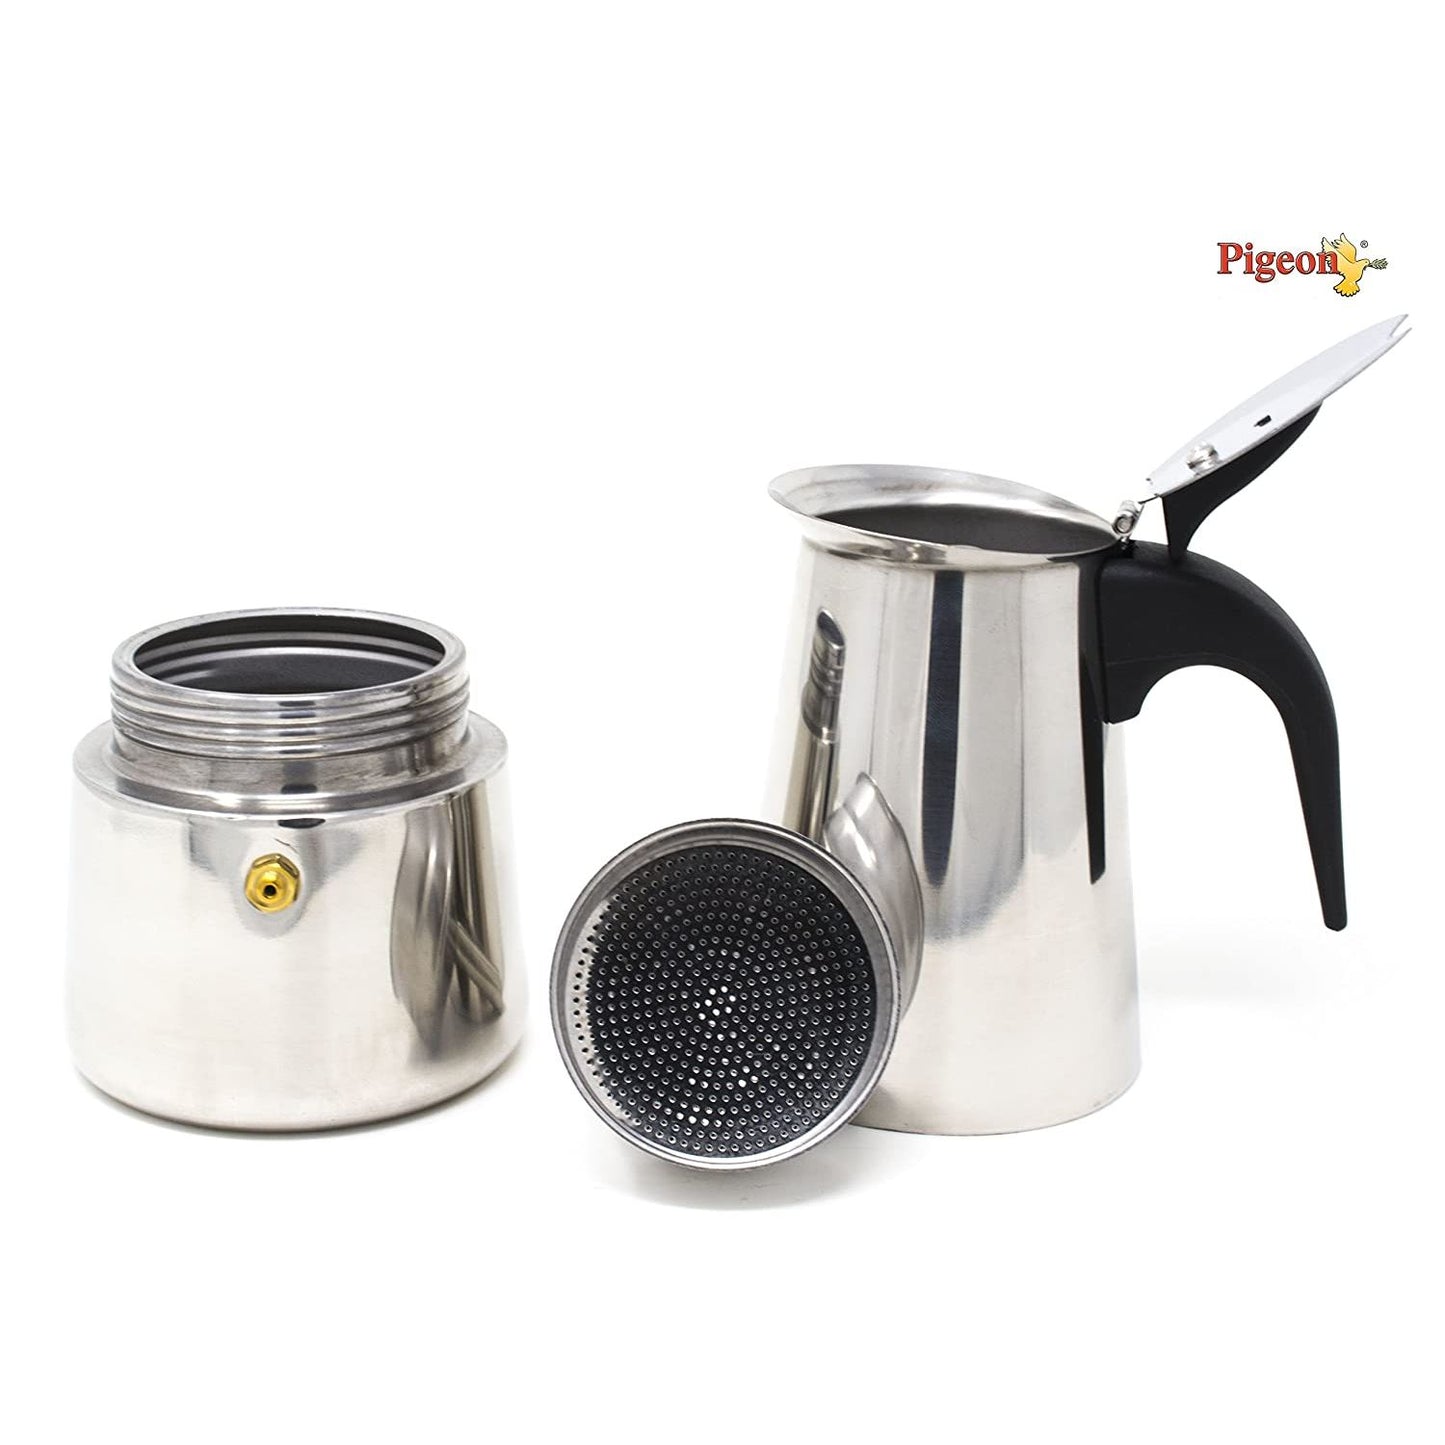 Pigeon Xpresso Stainless Steel Coffee Maker